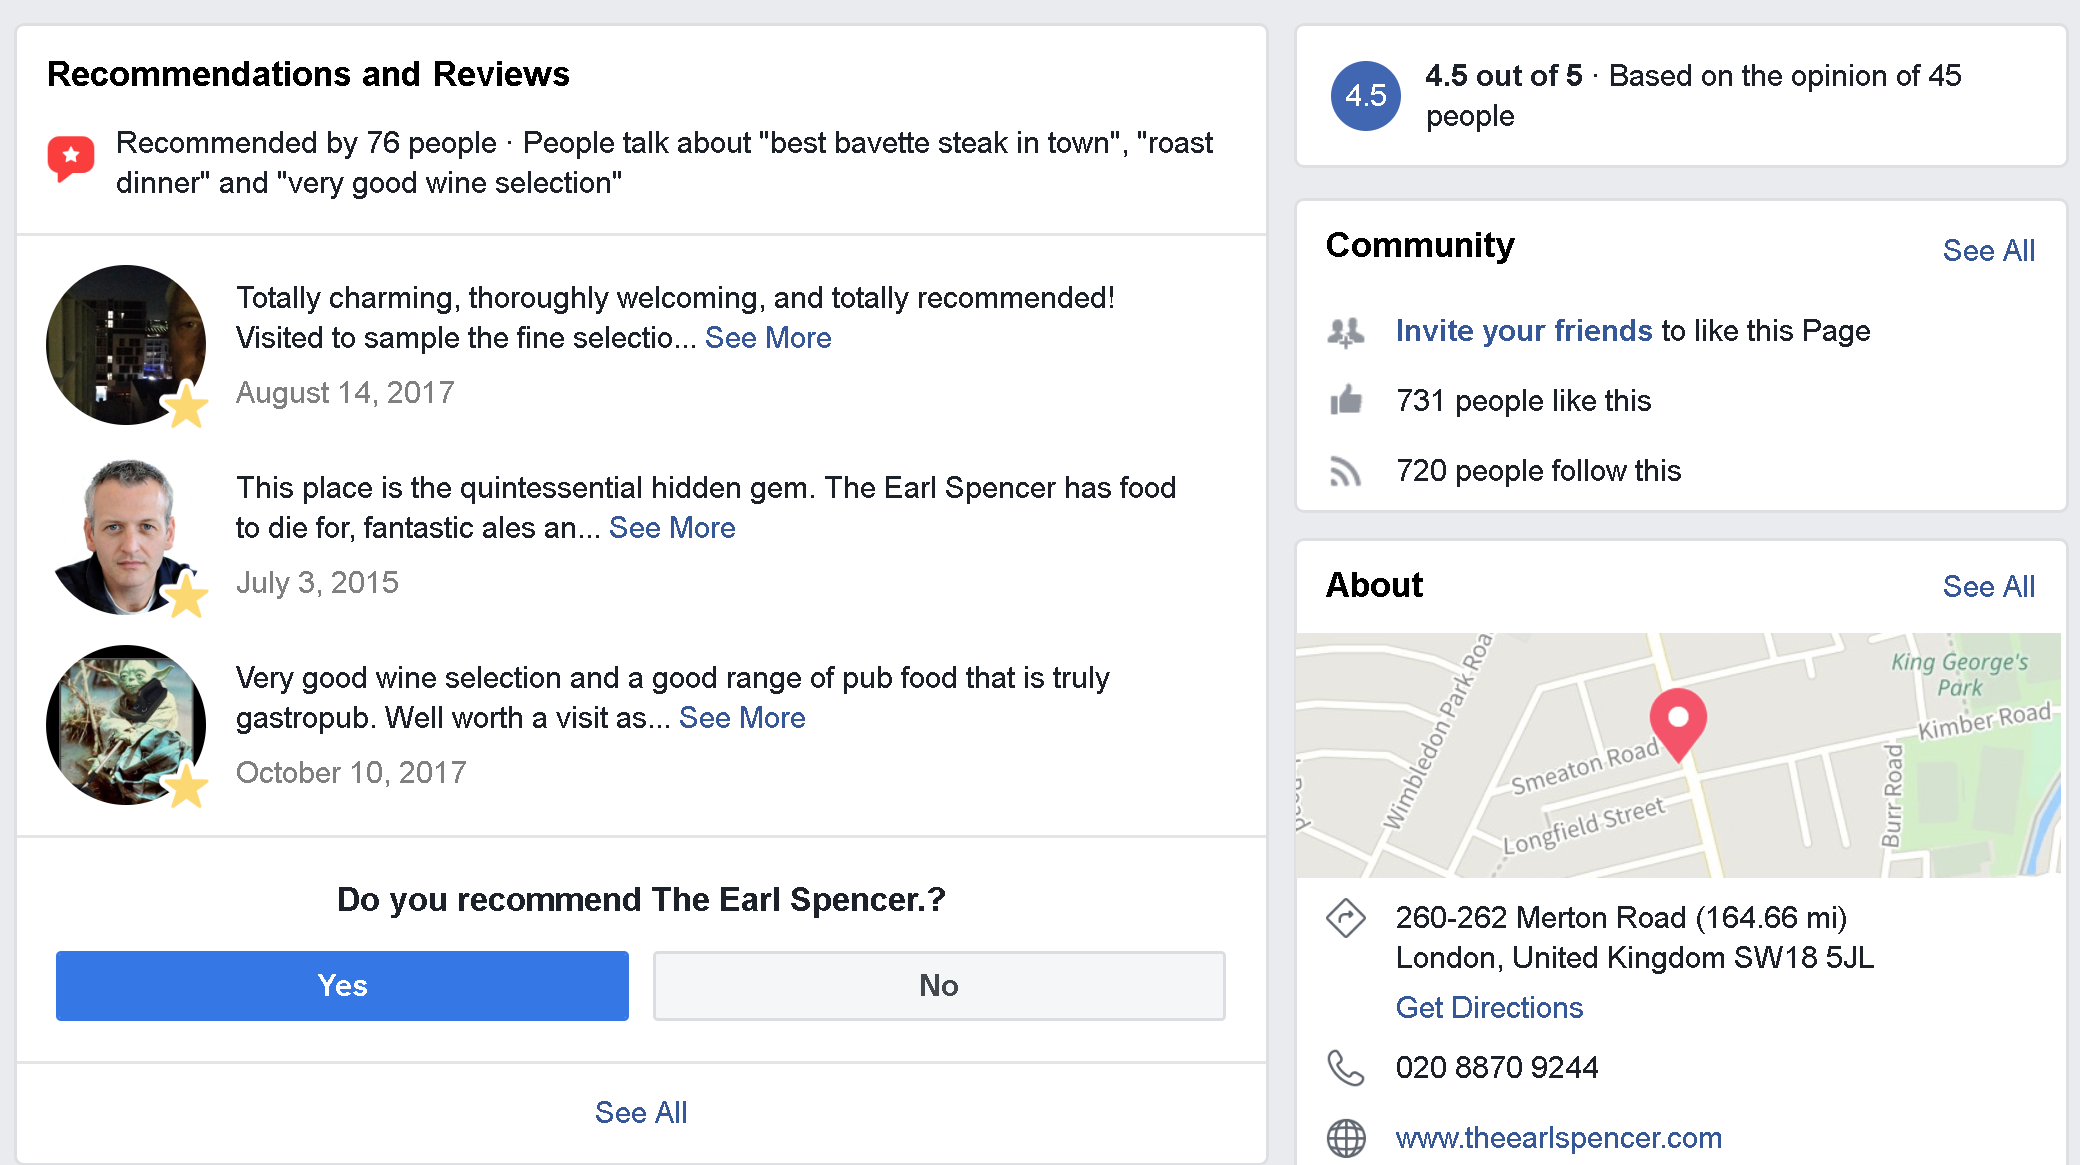 How to Get Facebook Reviews for Your Business Page (15 Easy Ways)